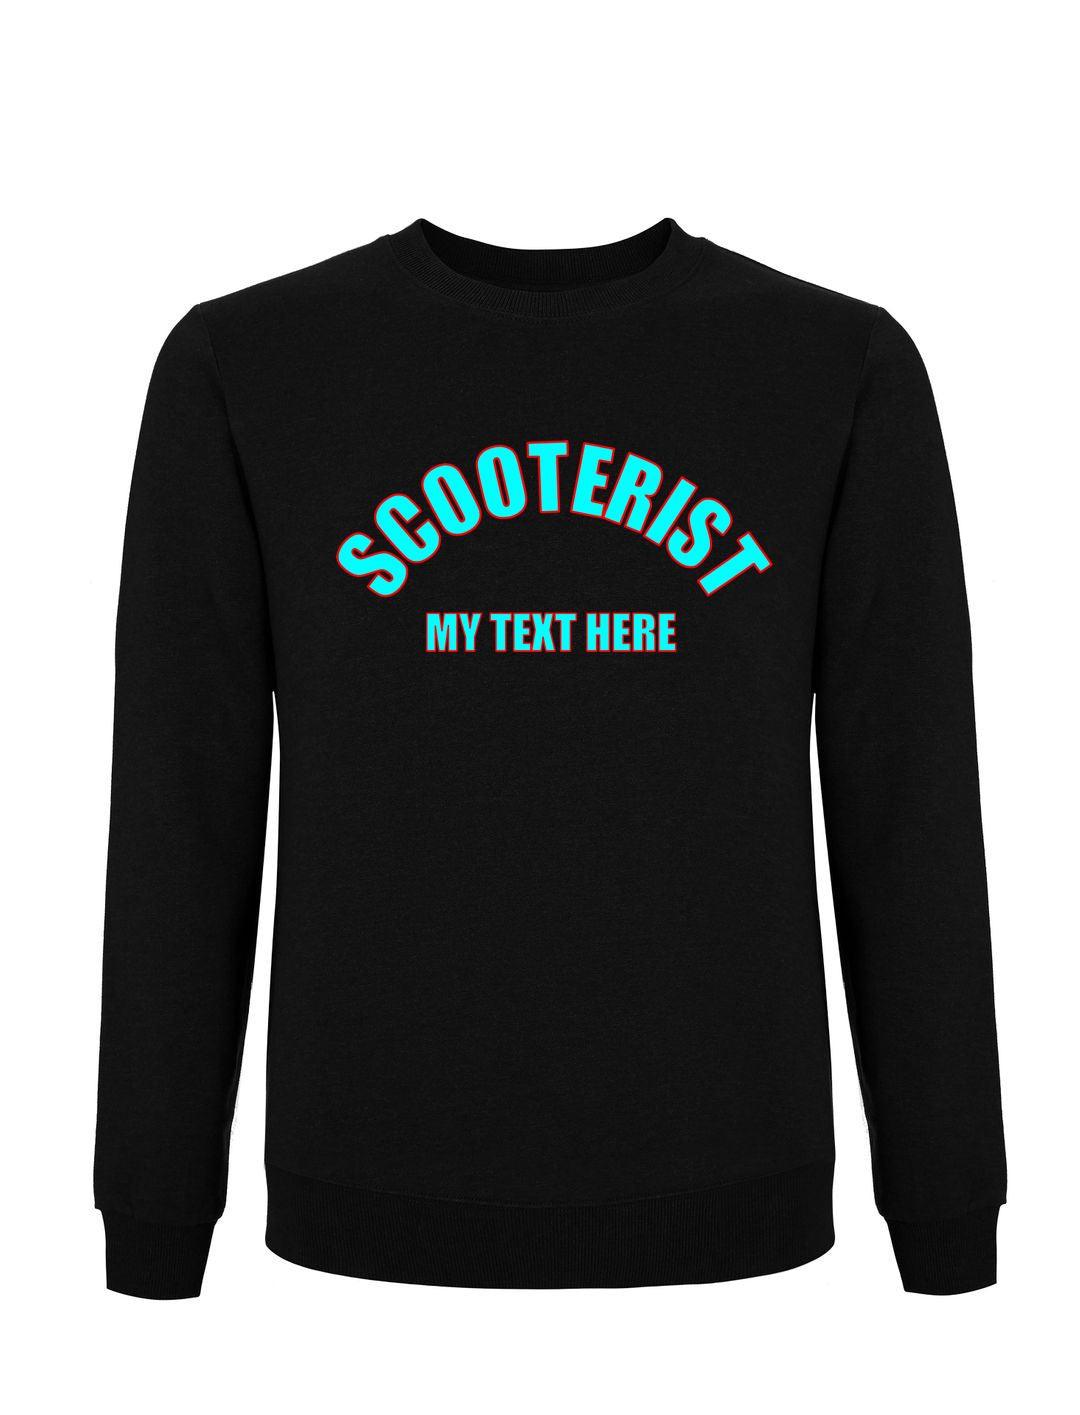 SCOOTERIST: Bespoke Sweatshirt Made to Order. Town, Country, Scooter Club, Model (2 Colours) - SOUND IS COLOUR